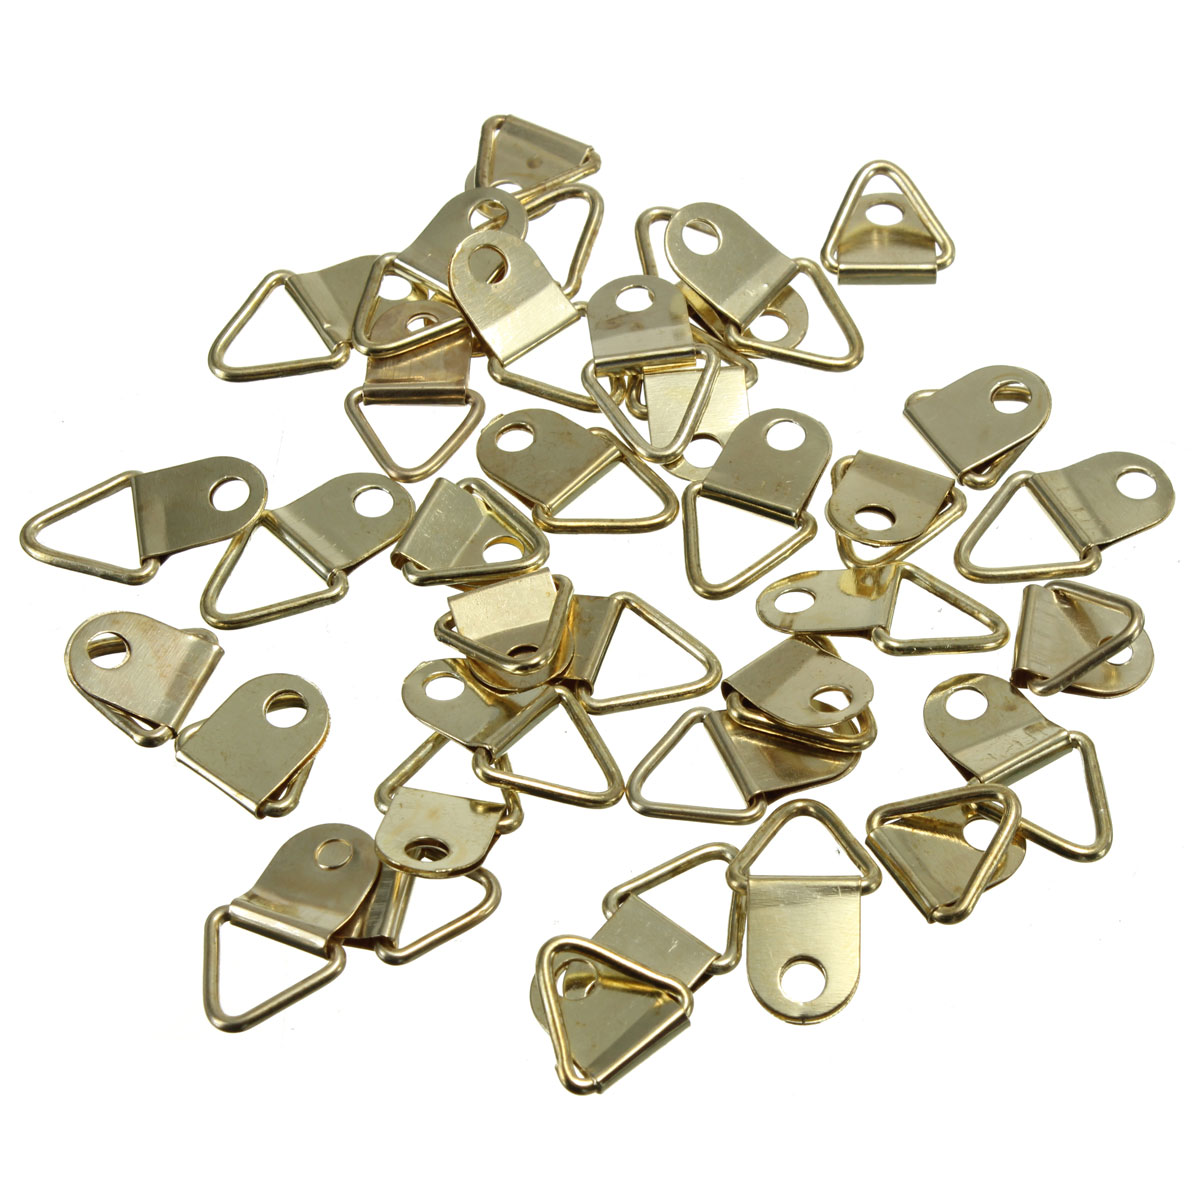 50Pcs-Copper-Triangle-Photo-Picture-Frame-Wall-Mount-Hook-Hanger-Ring-1033984-6